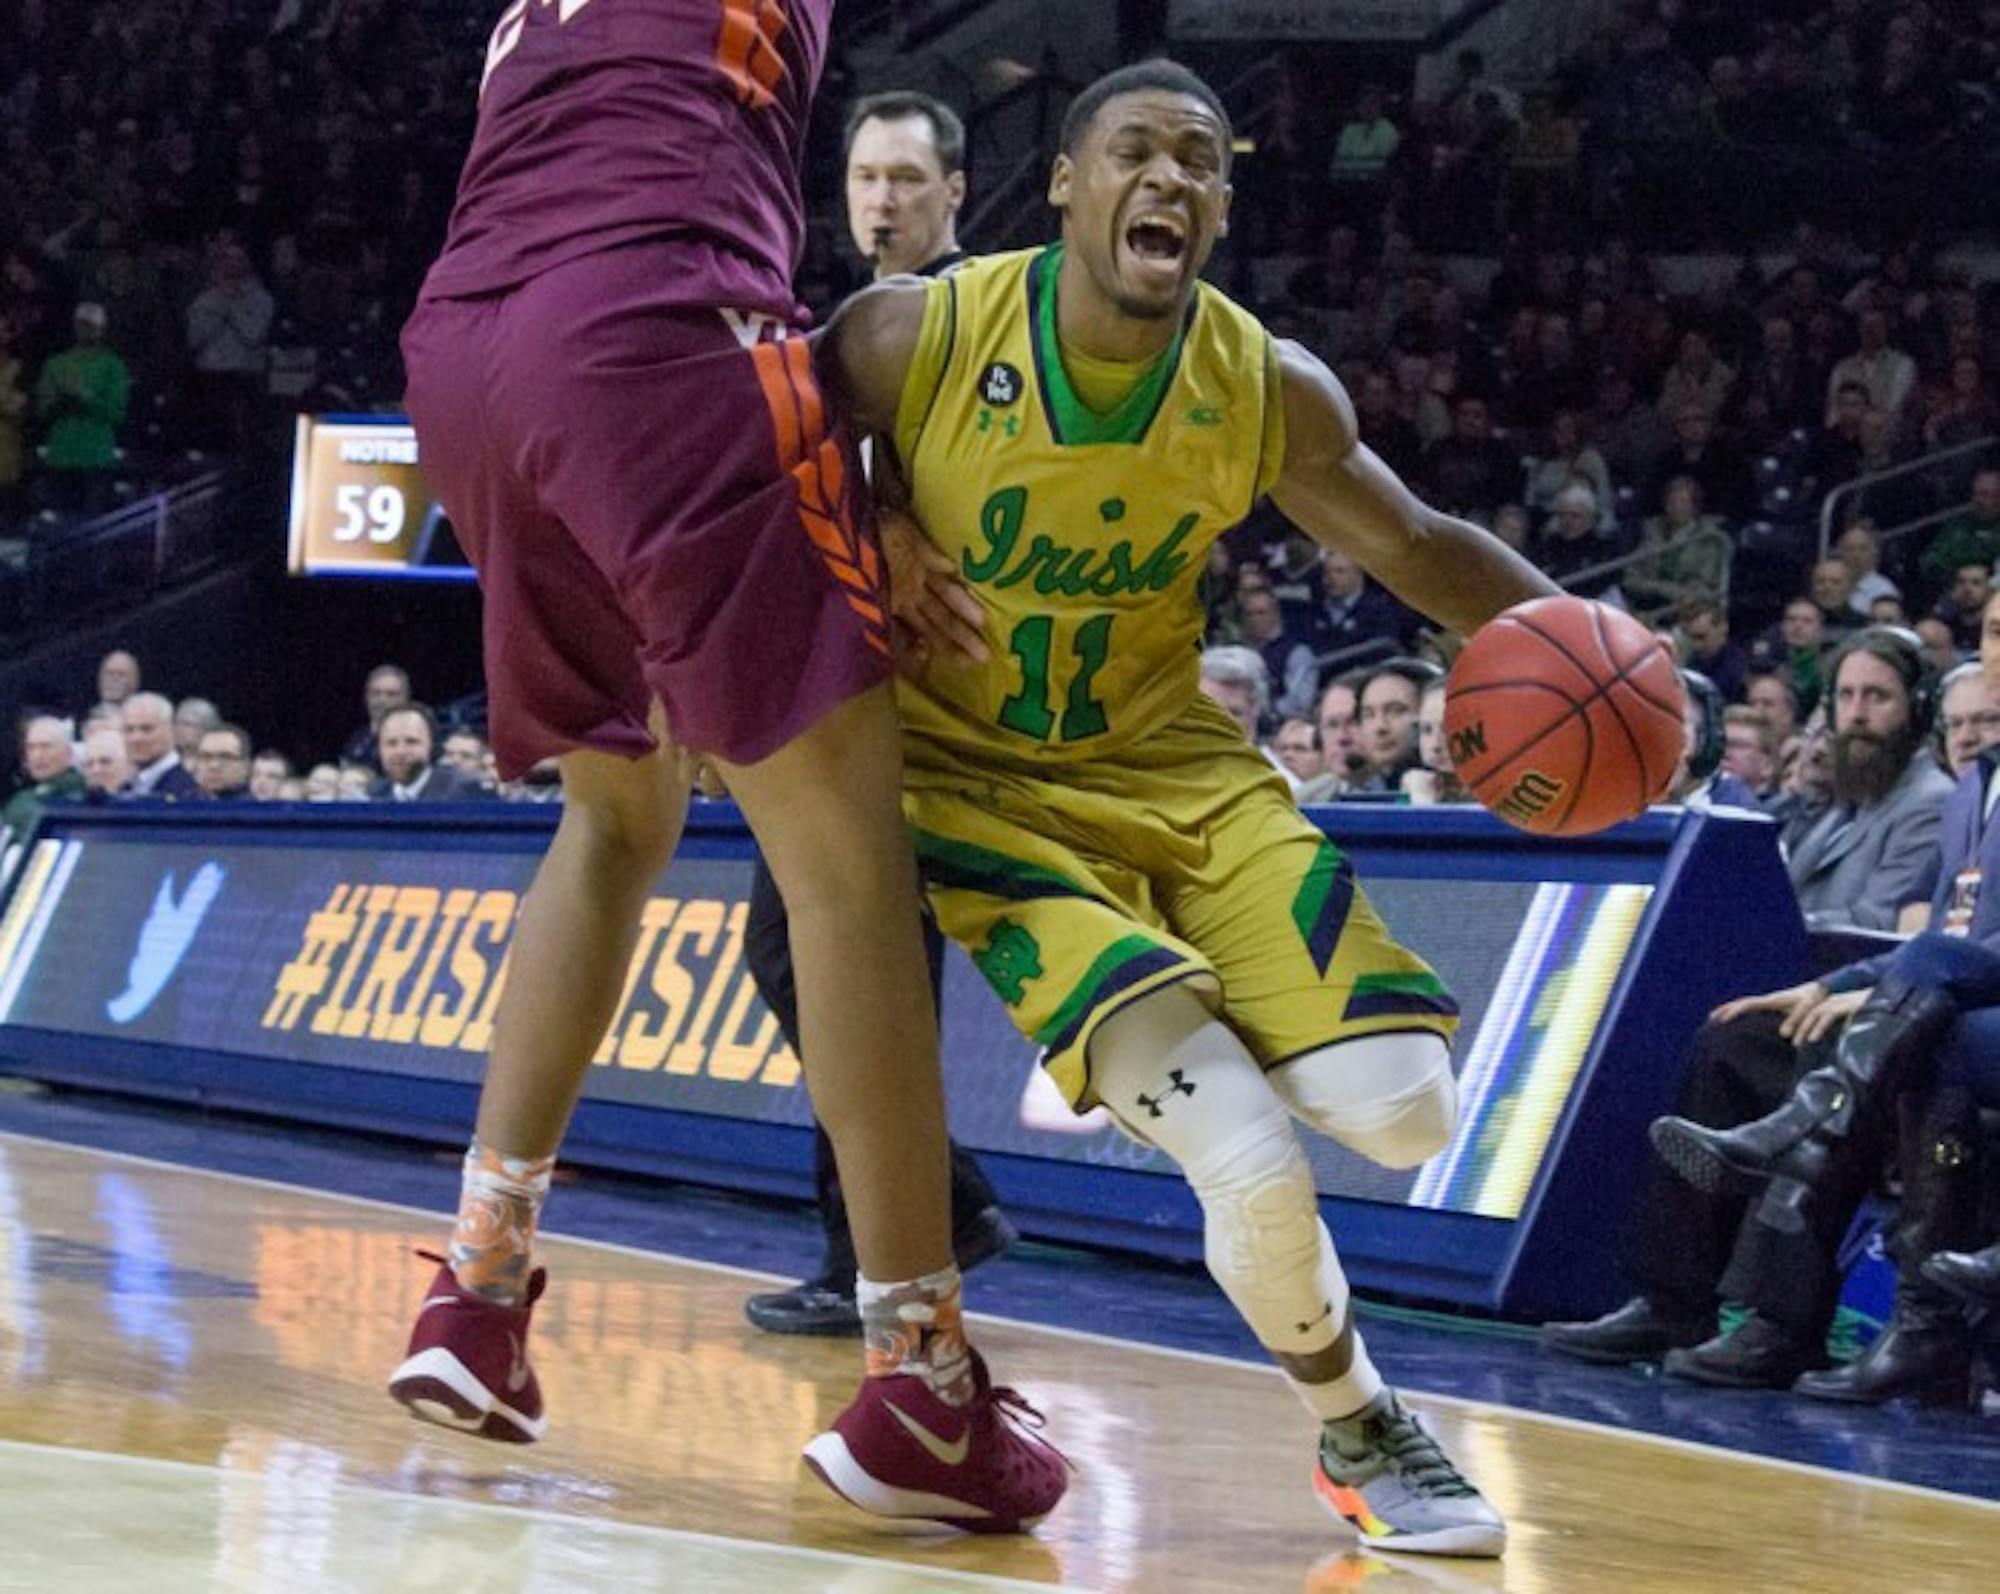 Irish junior guard Demetrius Jackson attempts to get to the baseline during Notre Dame’s 83-81 win over Virginia Tech on Jan. 20 at Purcell Pavilion. Jackson had 14 points and eight assists in Sunday’s win.